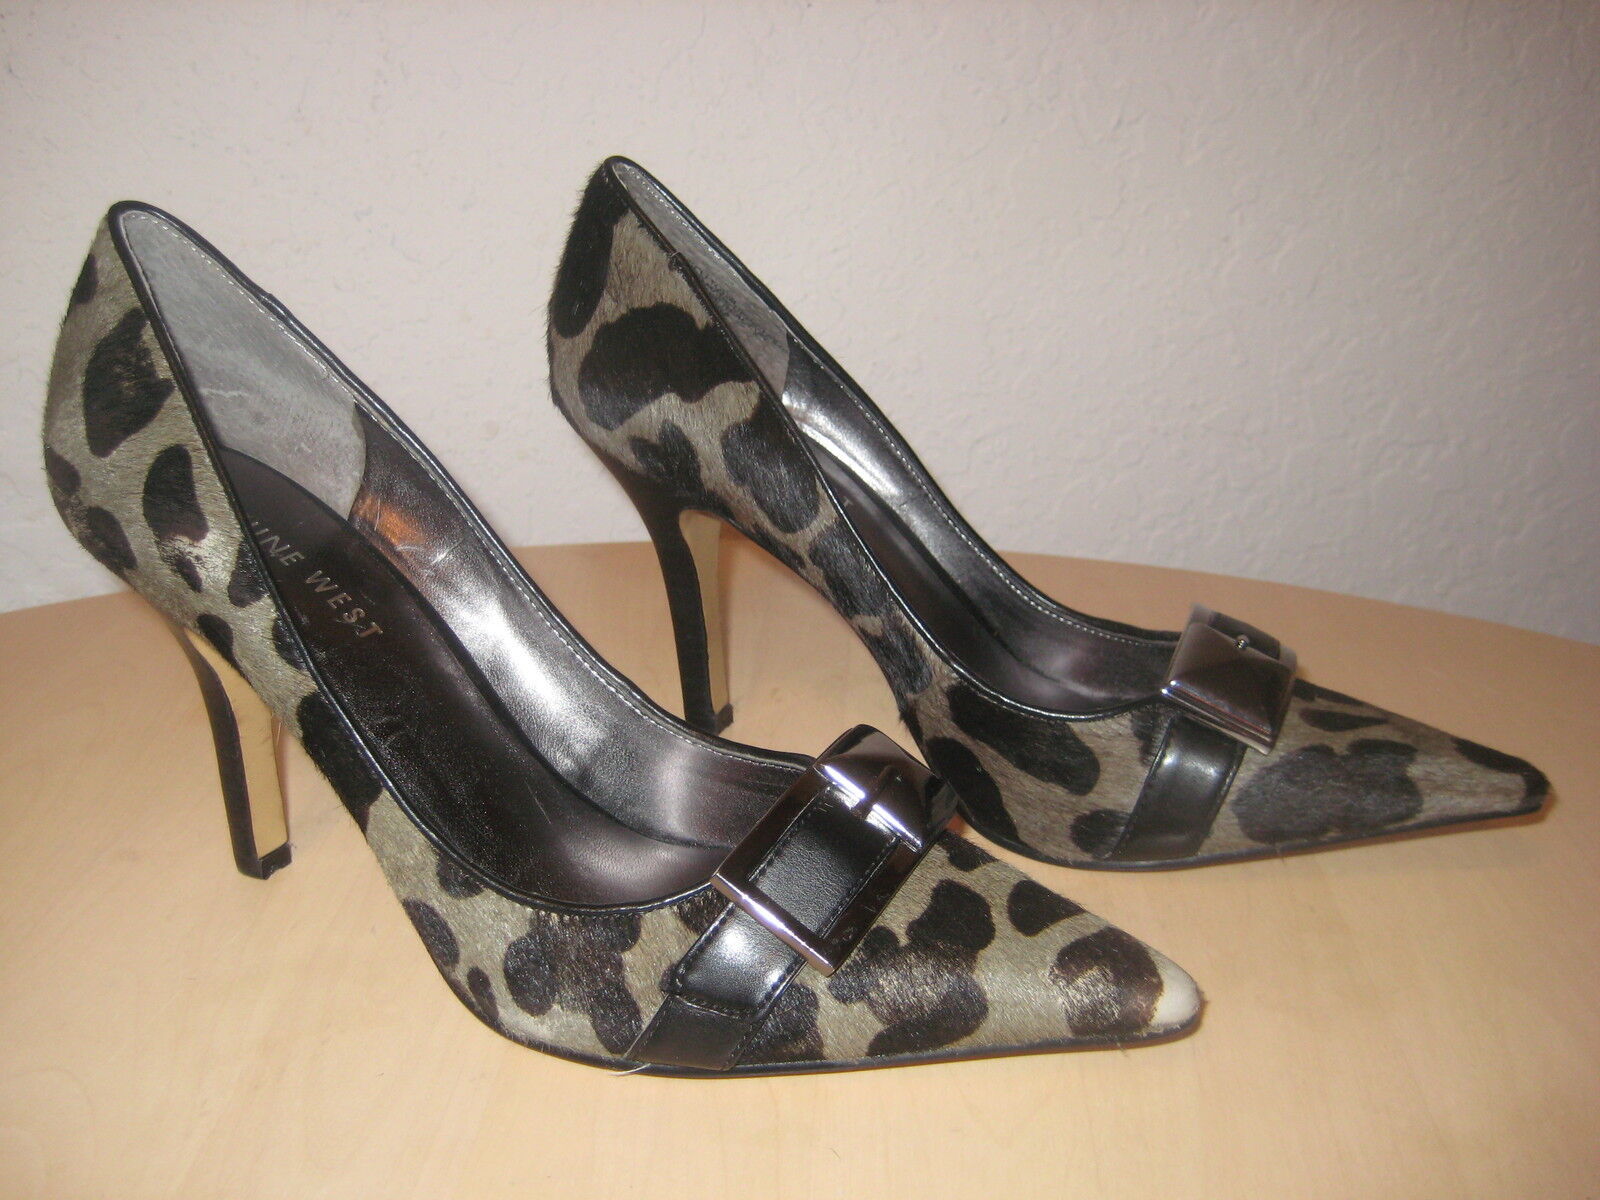 Primary image for Nine West Shoes Size 5.5 M New Womens Bell Town Olive Black Leopard Pumps NWOB